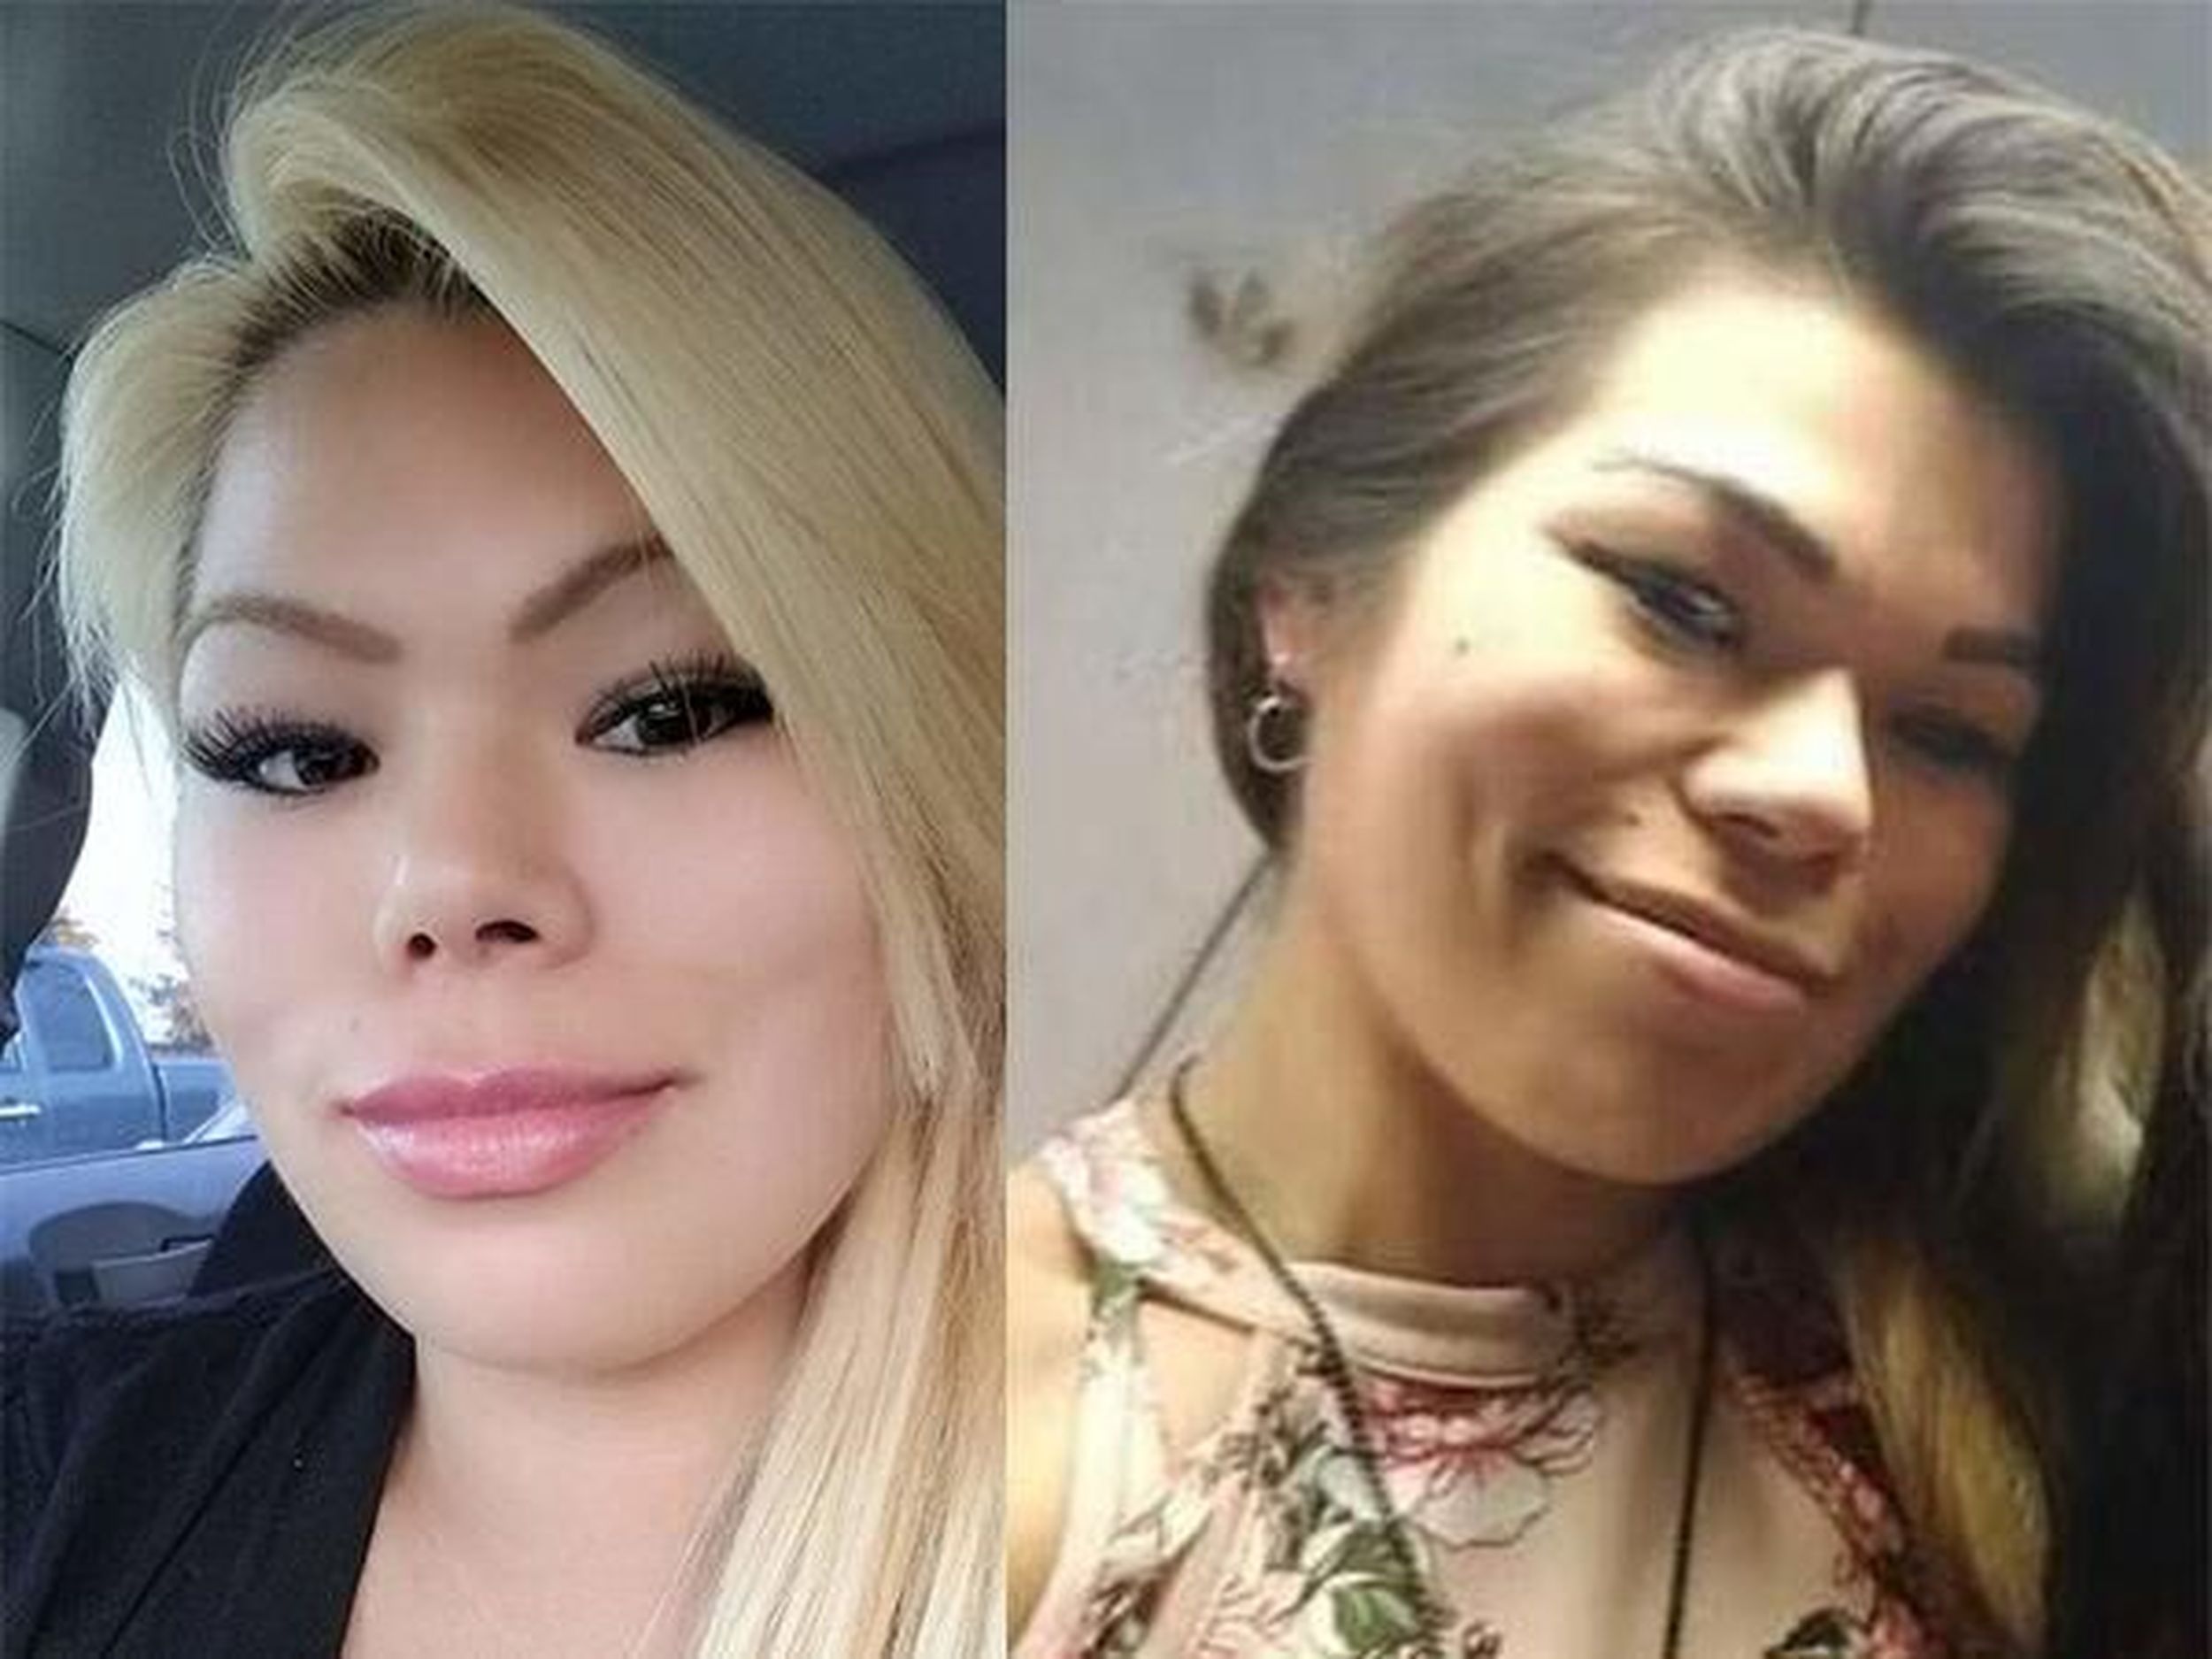 Missing Lummi Nation Woman Found Alive Relatives And Police Say The Spokesman Review 9575